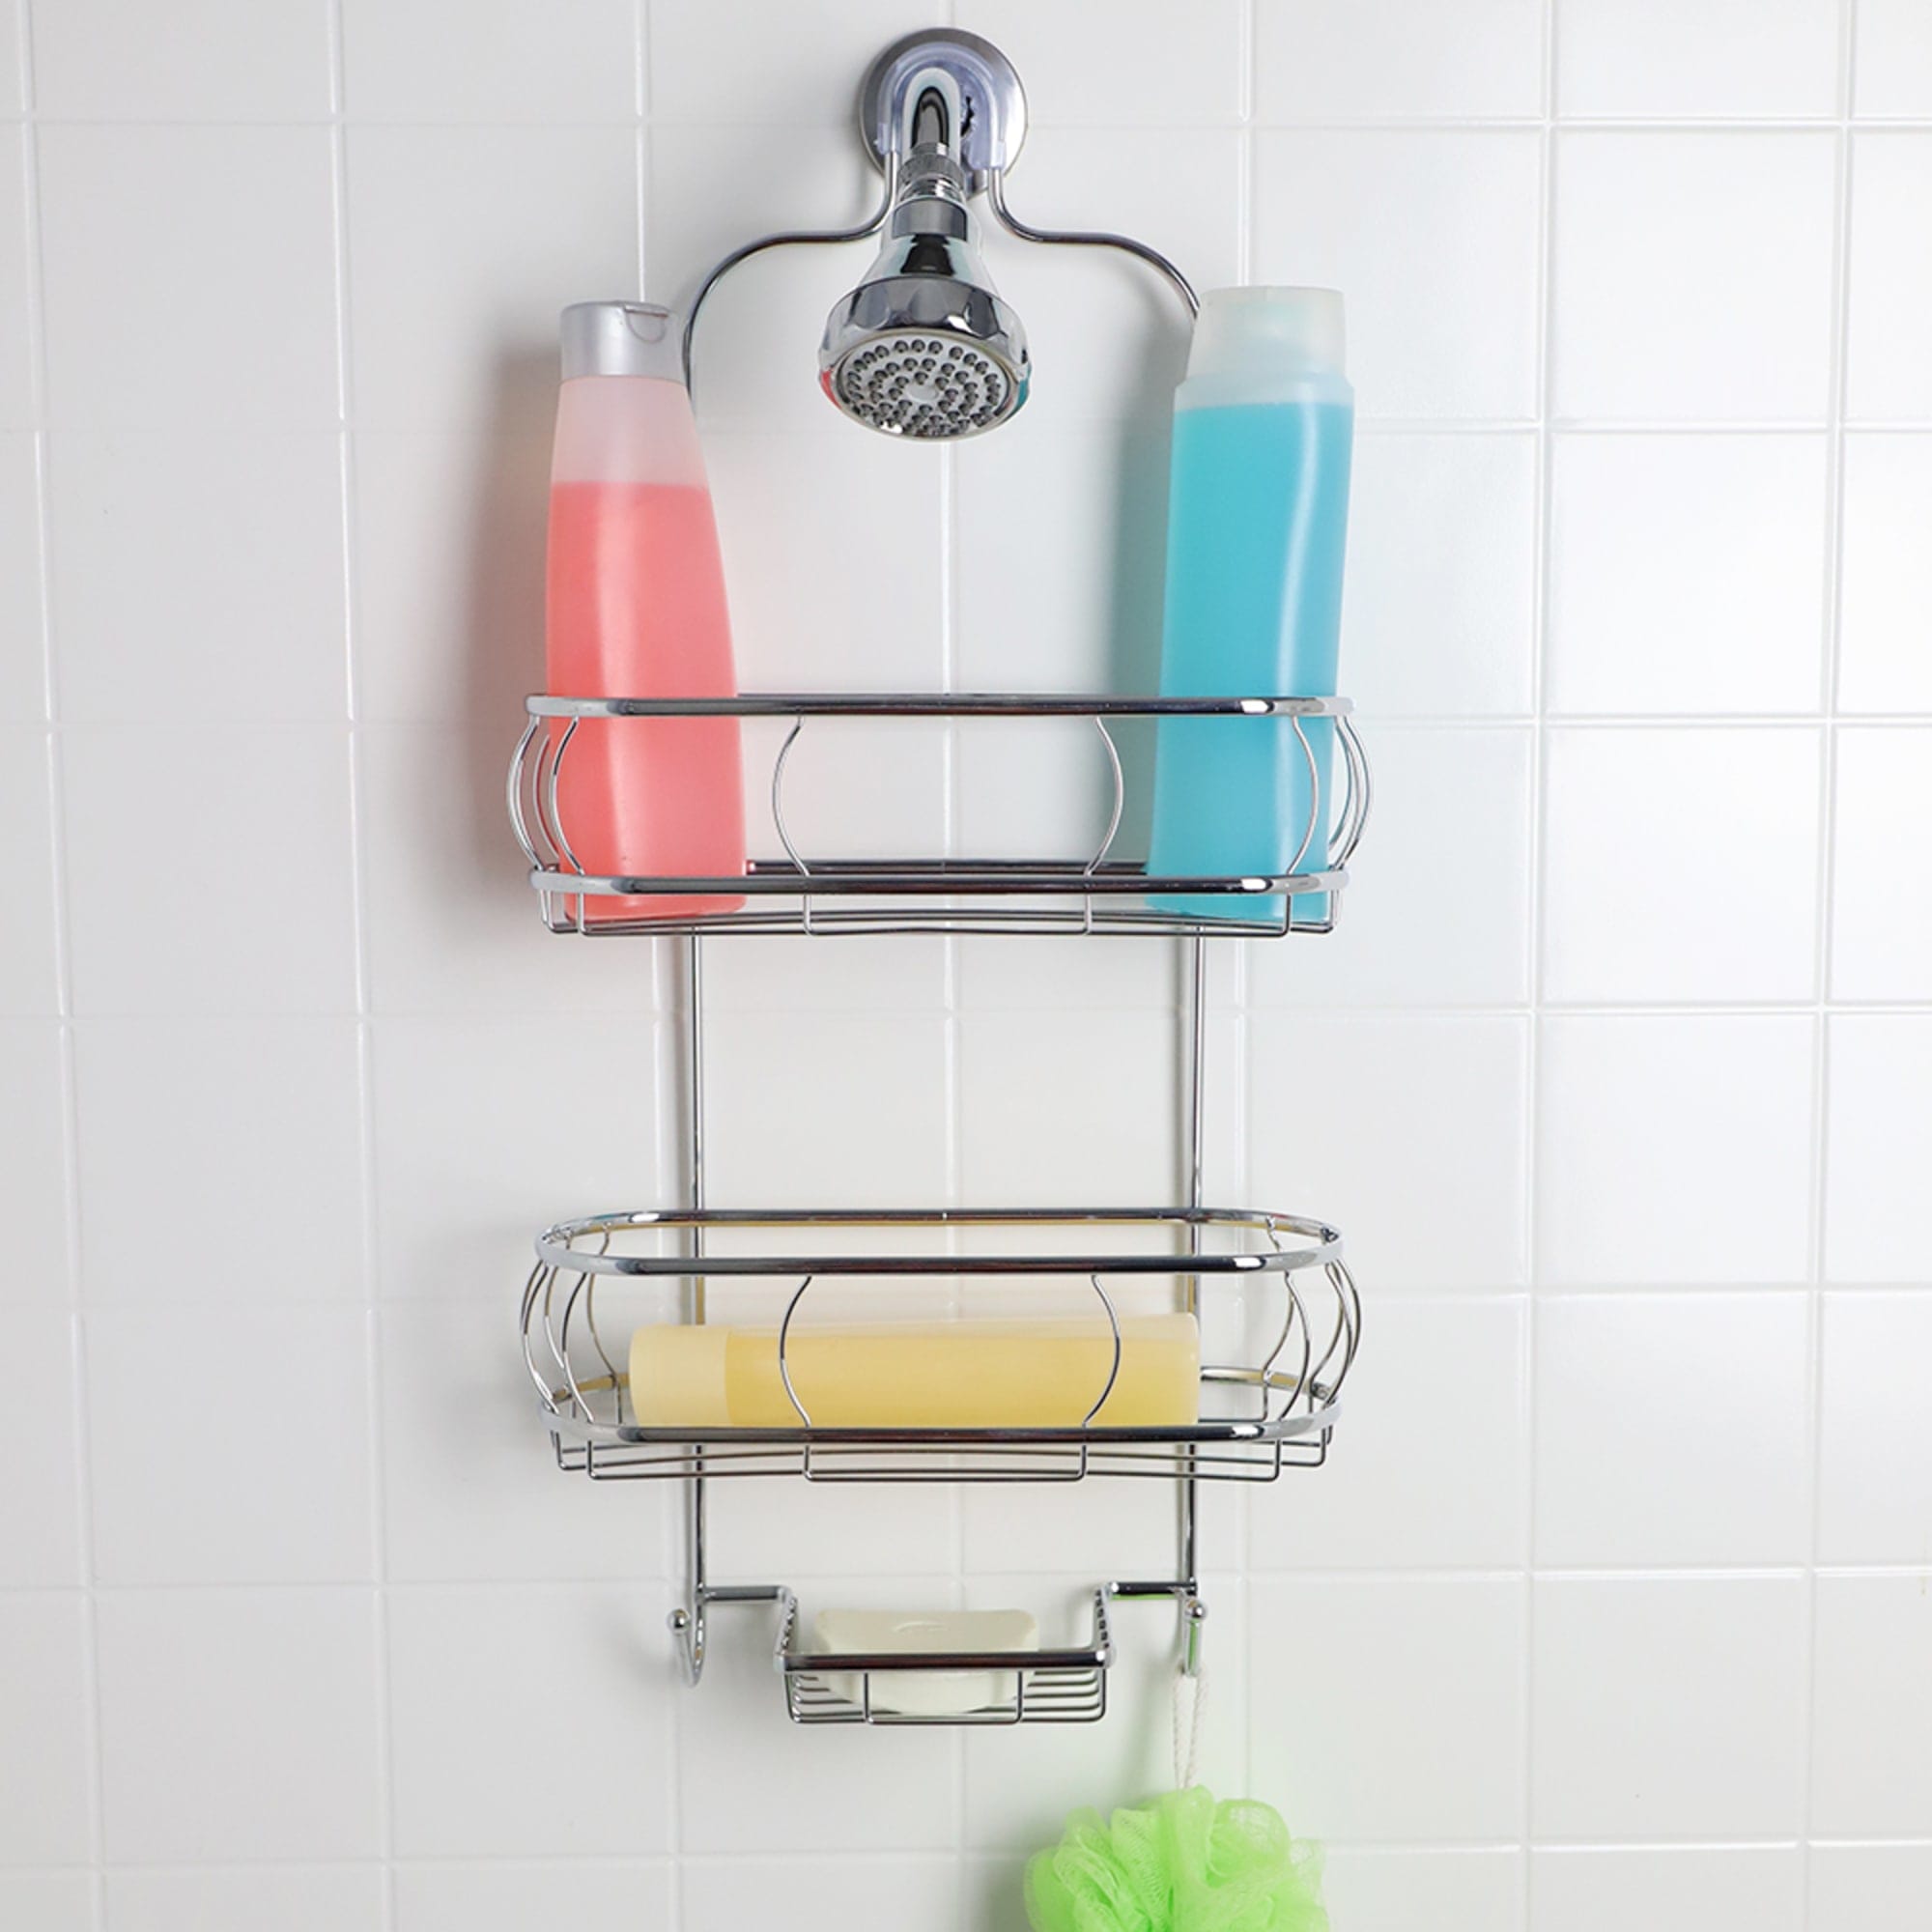 Hanging Shower Caddy (2-Pack)